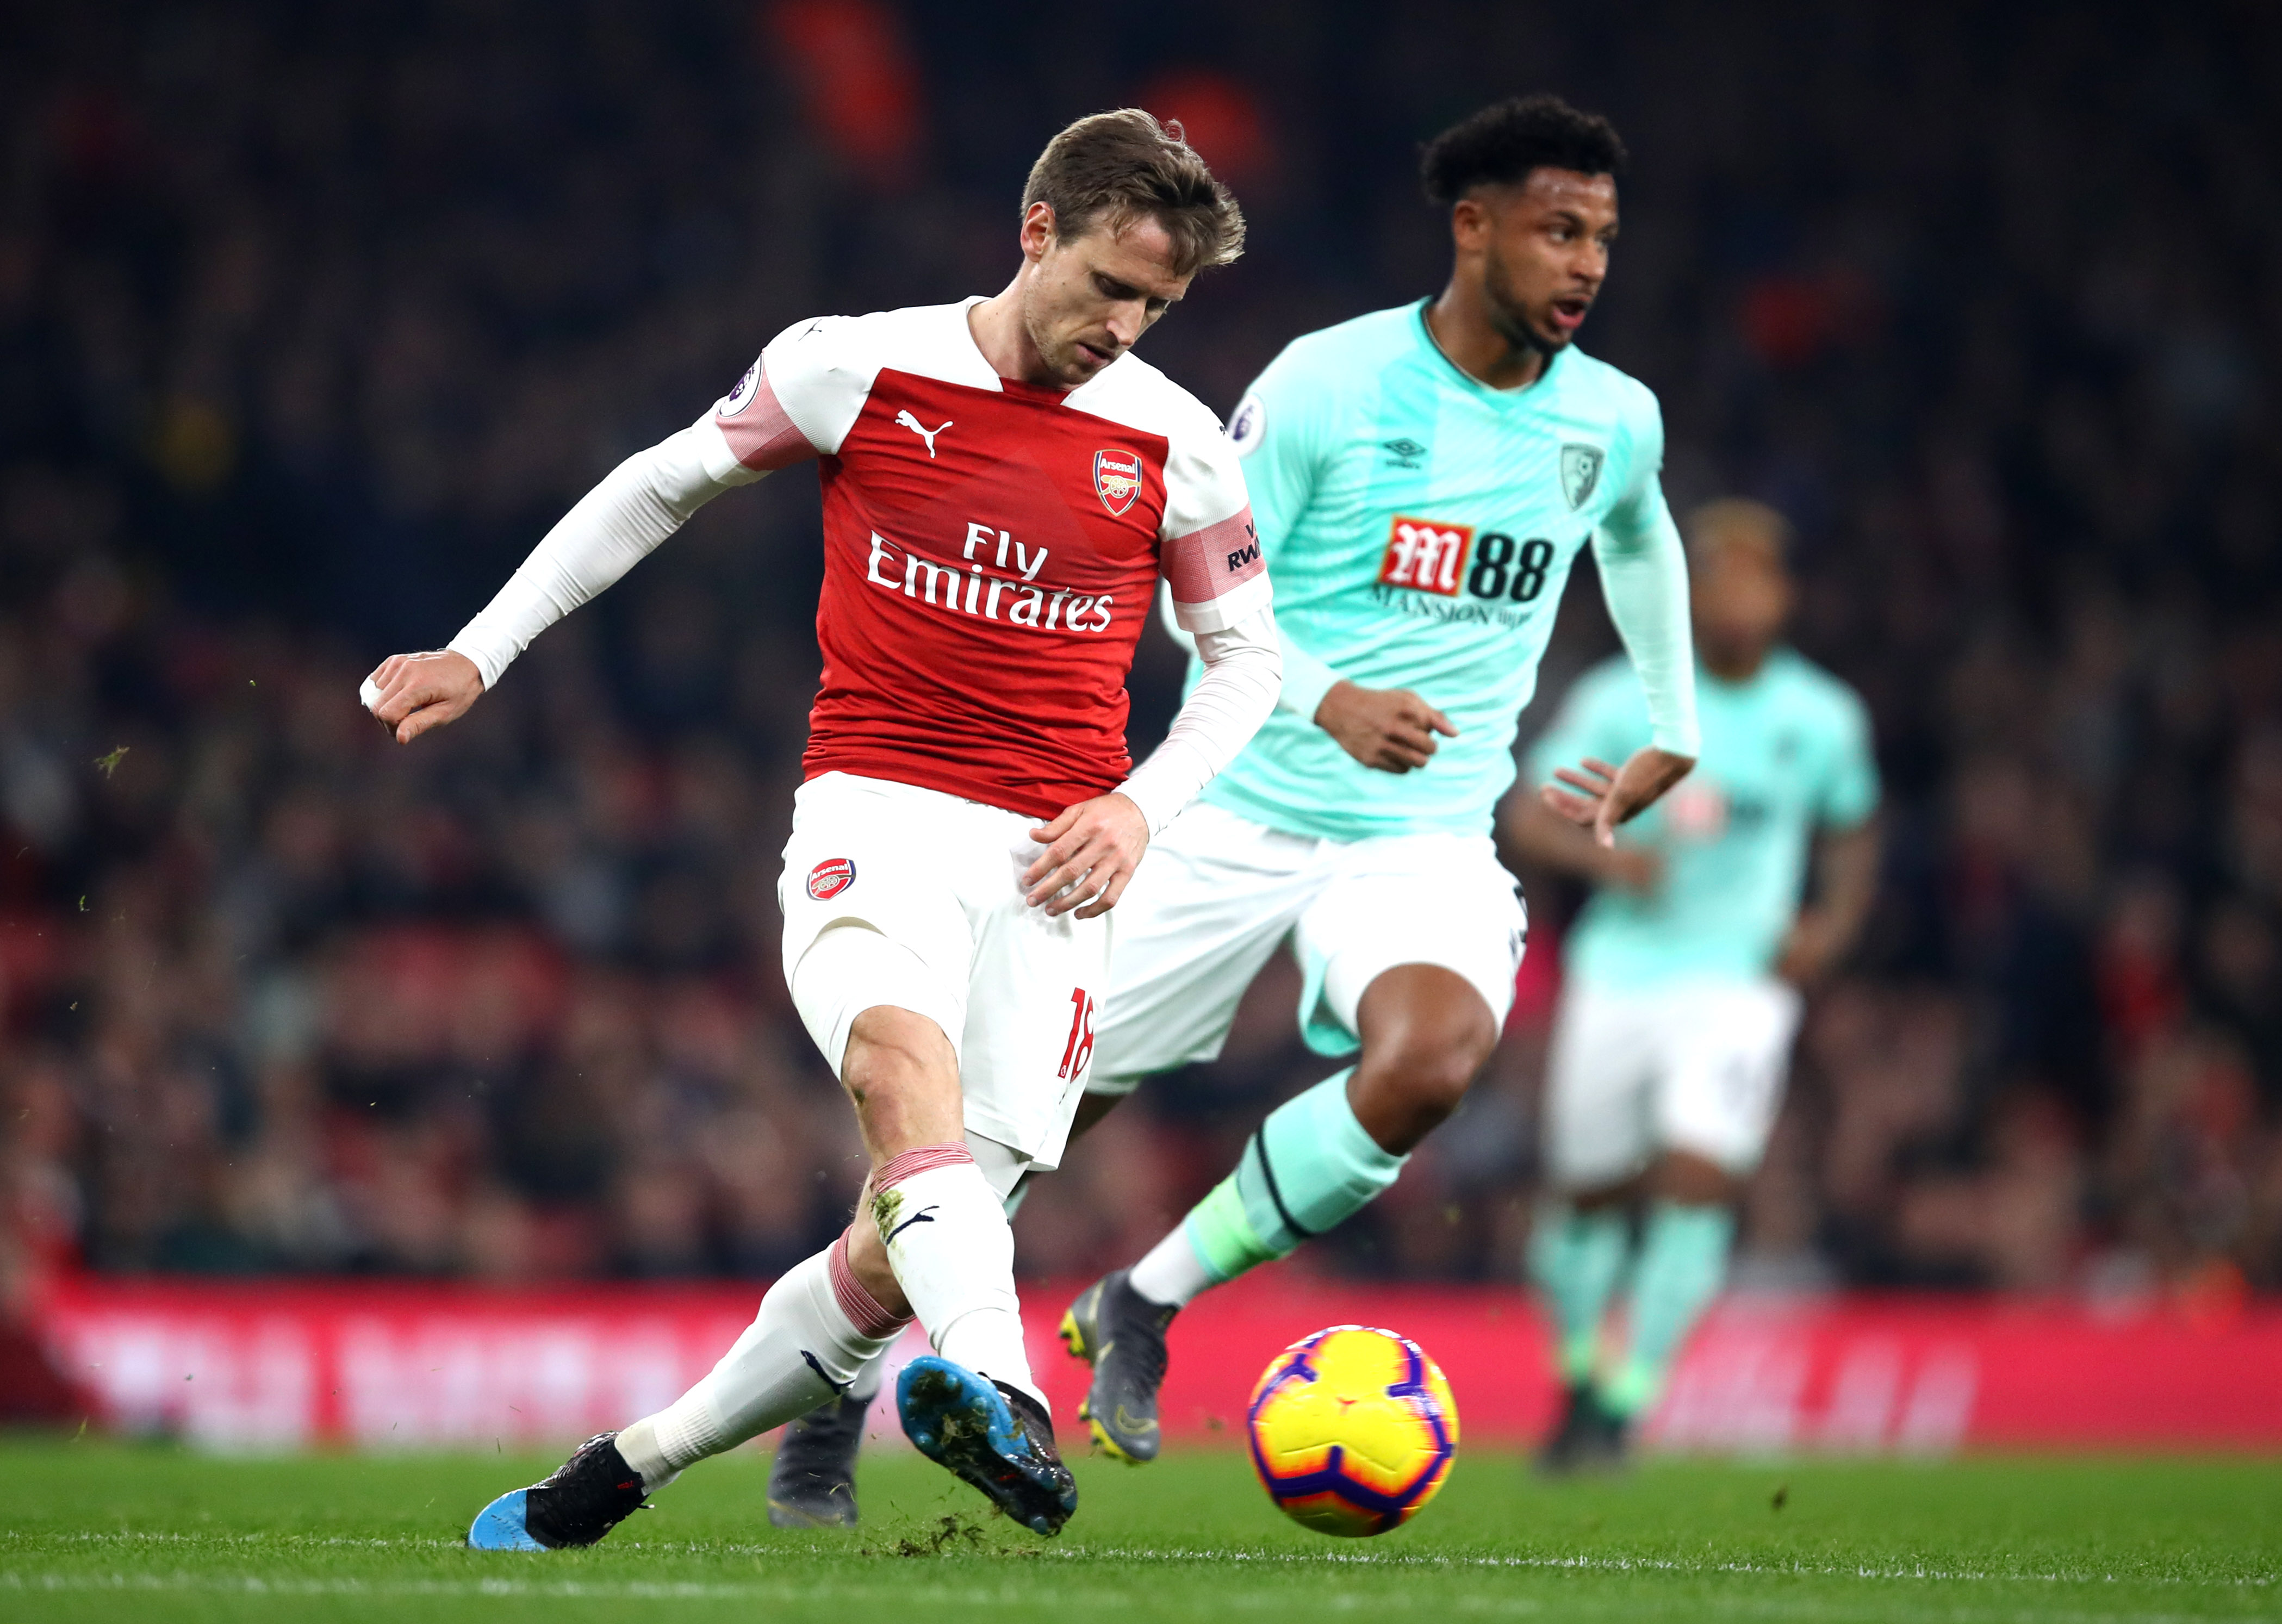 A return to La Liga on the cards for Monreal? (Photo courtesy: AFP/Getty)